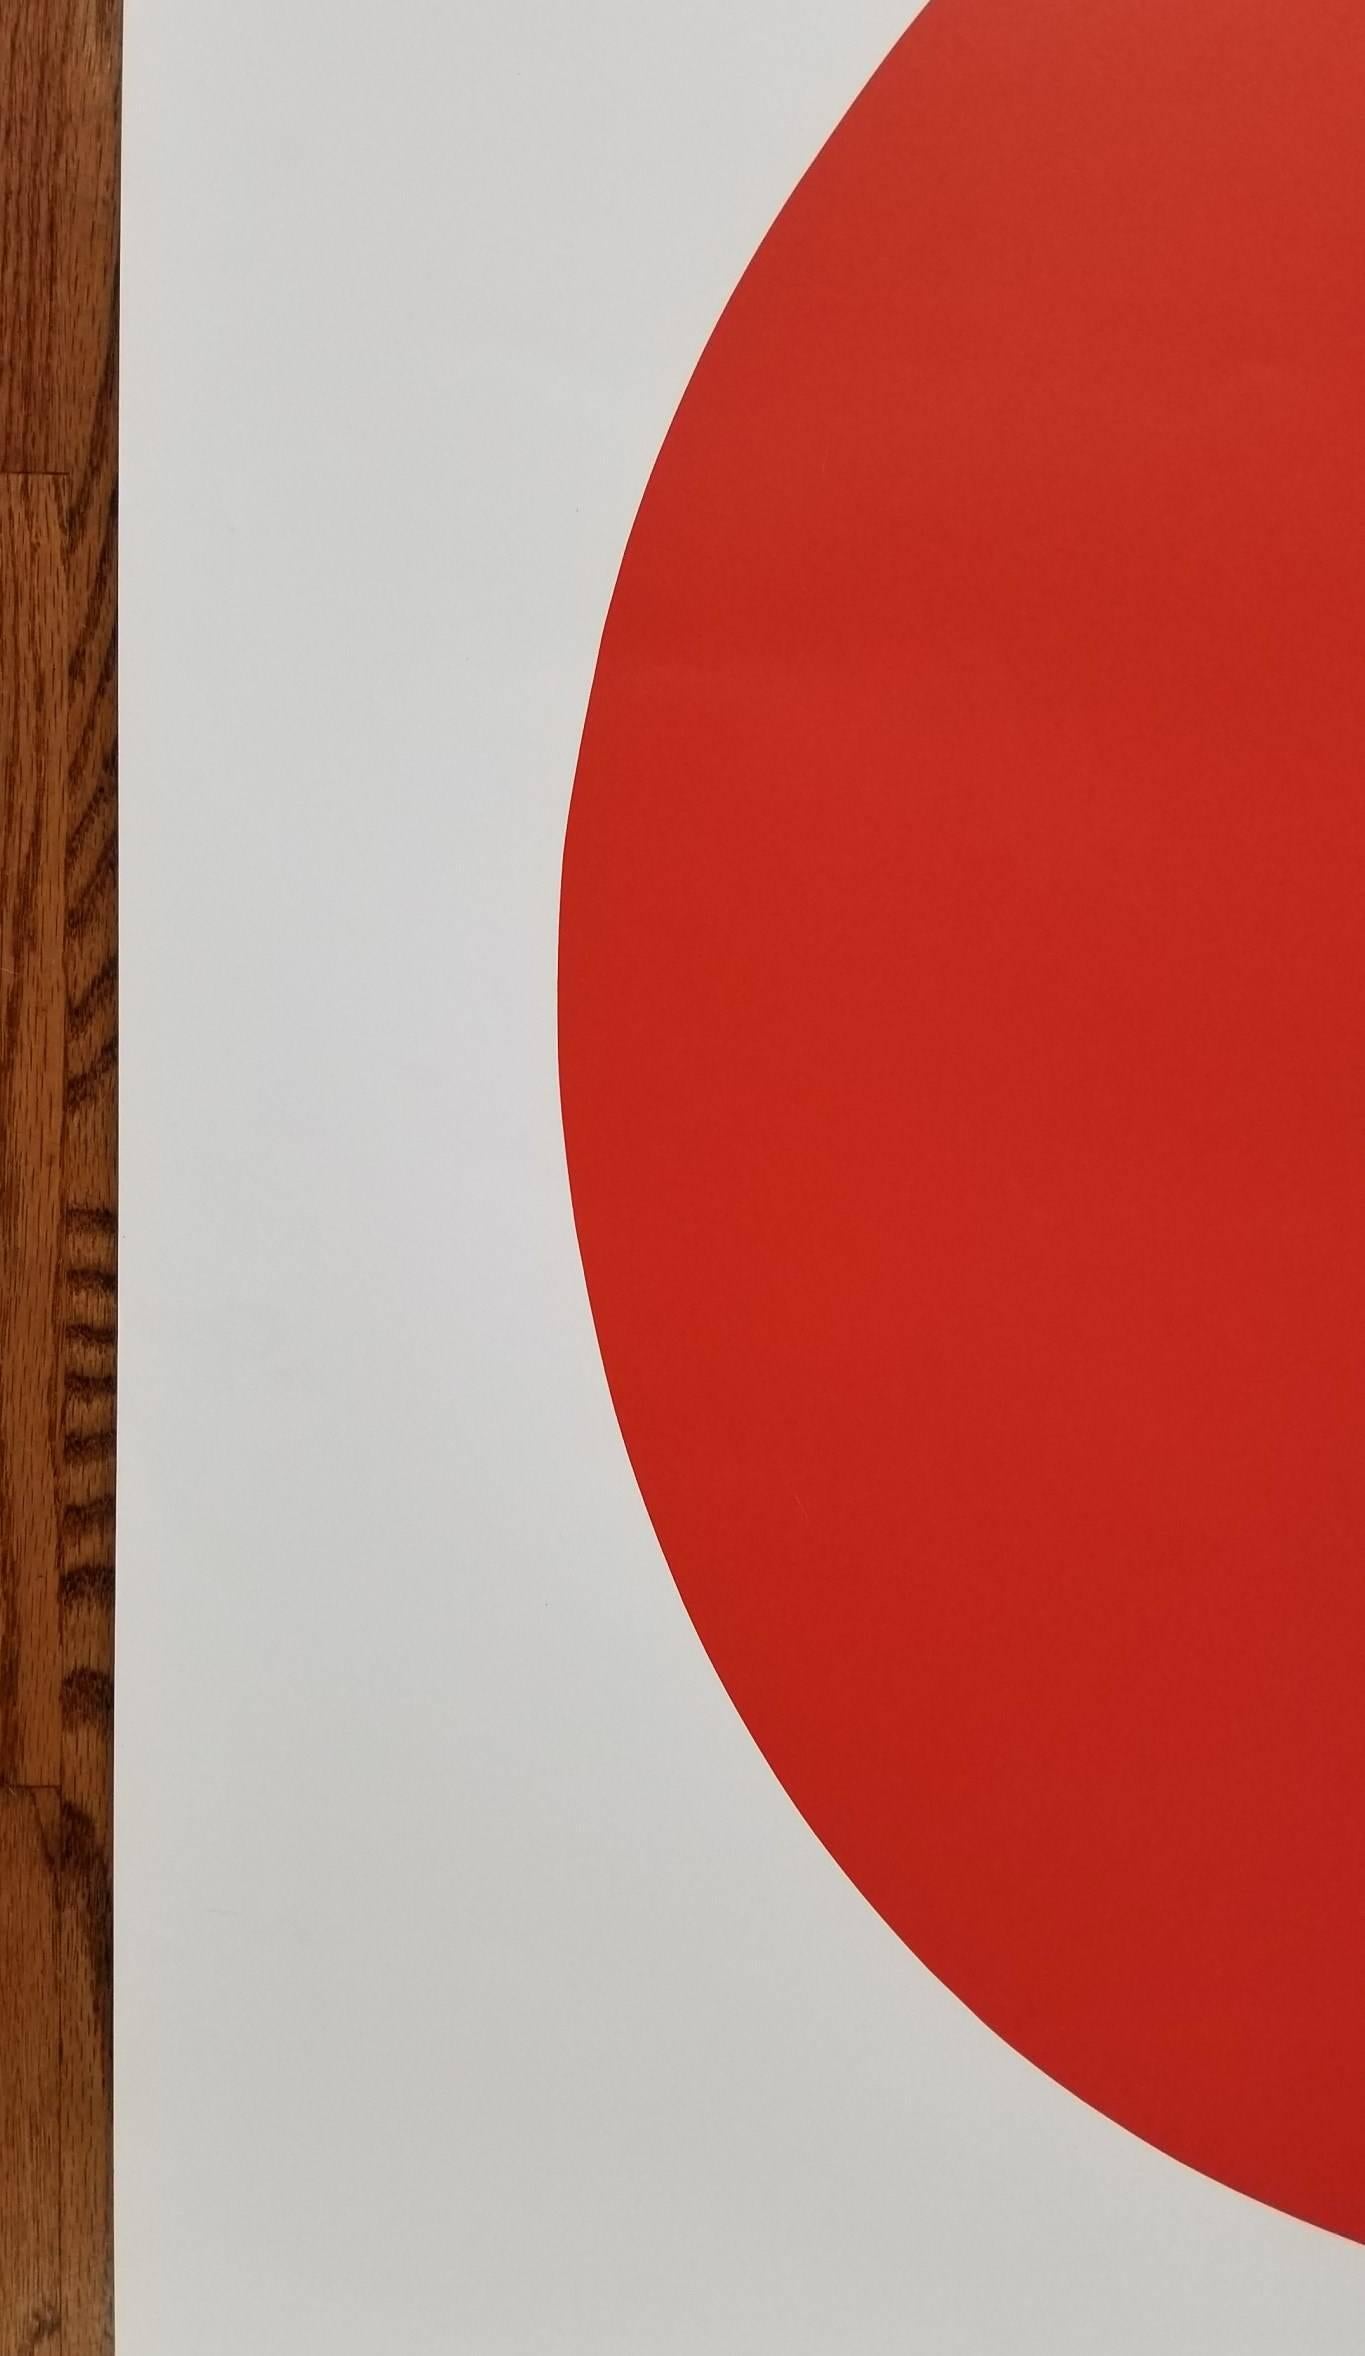 A large original offset-lithograph, exhibition poster on wove paper by American artist Ellsworth Kelly (1923-2015) titled 